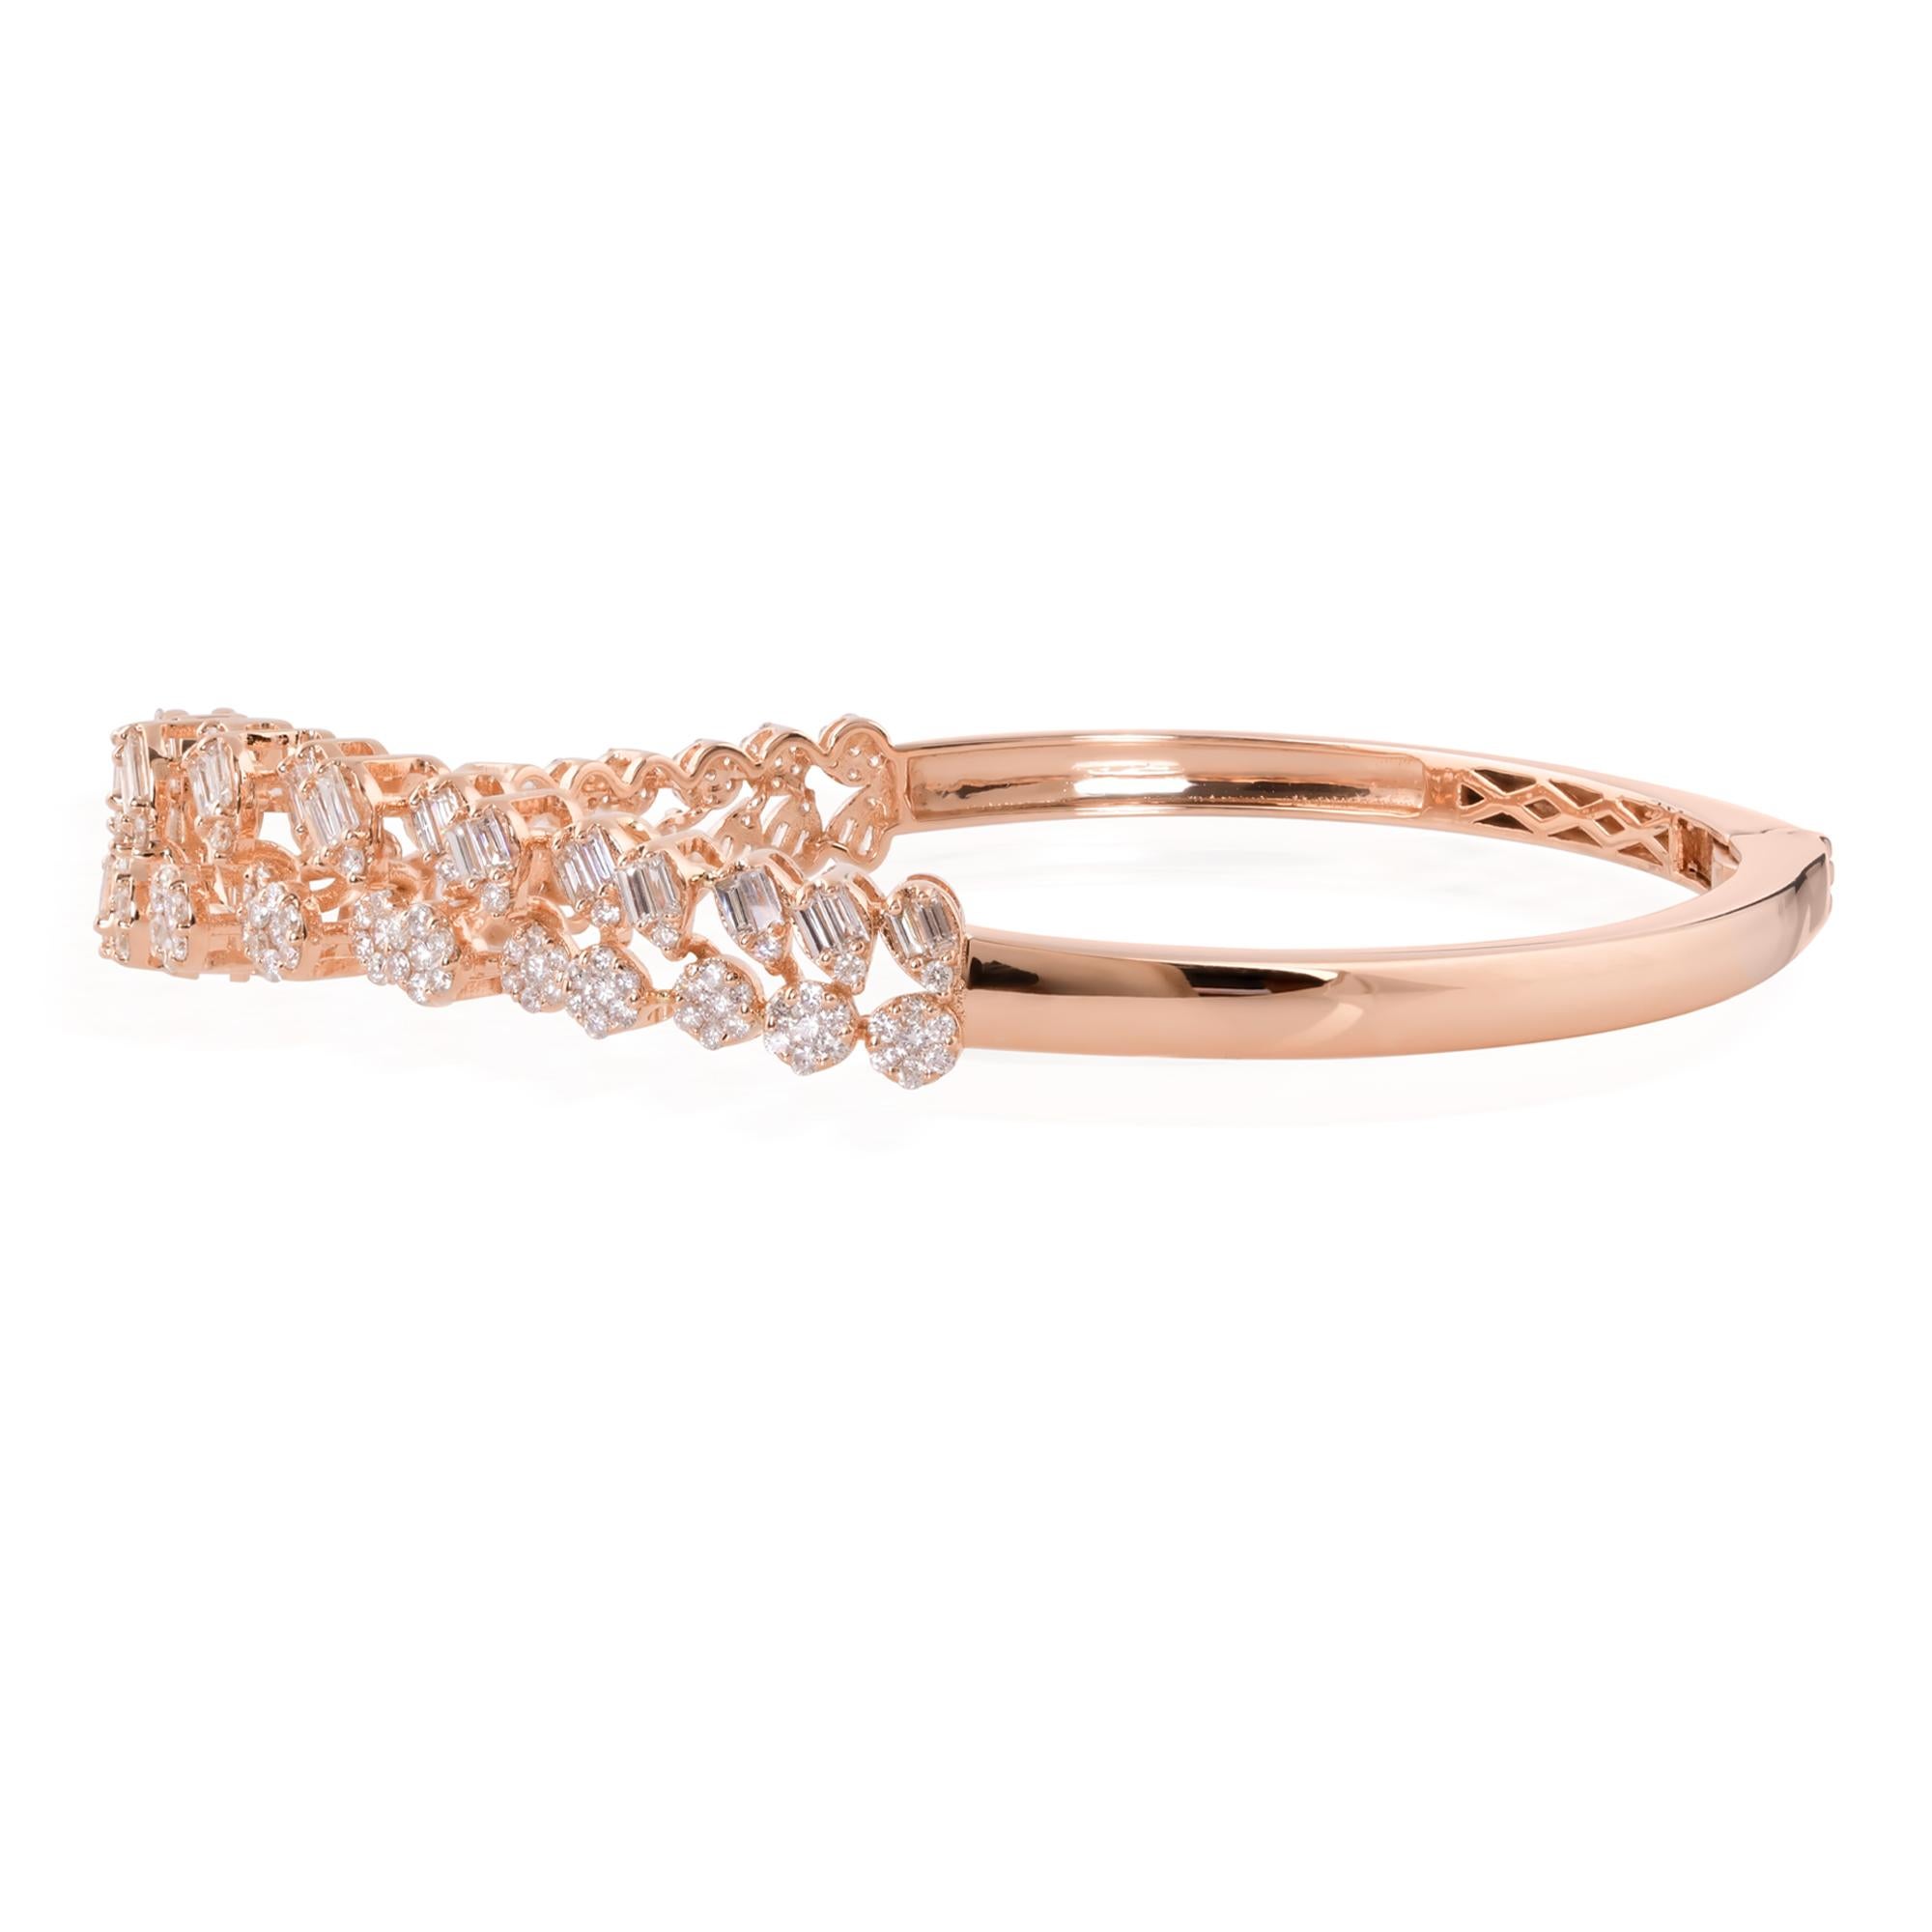 The focal point of this bracelet is the dazzling array of baguette and round diamonds meticulously set along its cuff. The baguette diamonds, with their sleek, elongated shape, evoke a sense of refined grace, while the round diamonds add a touch of